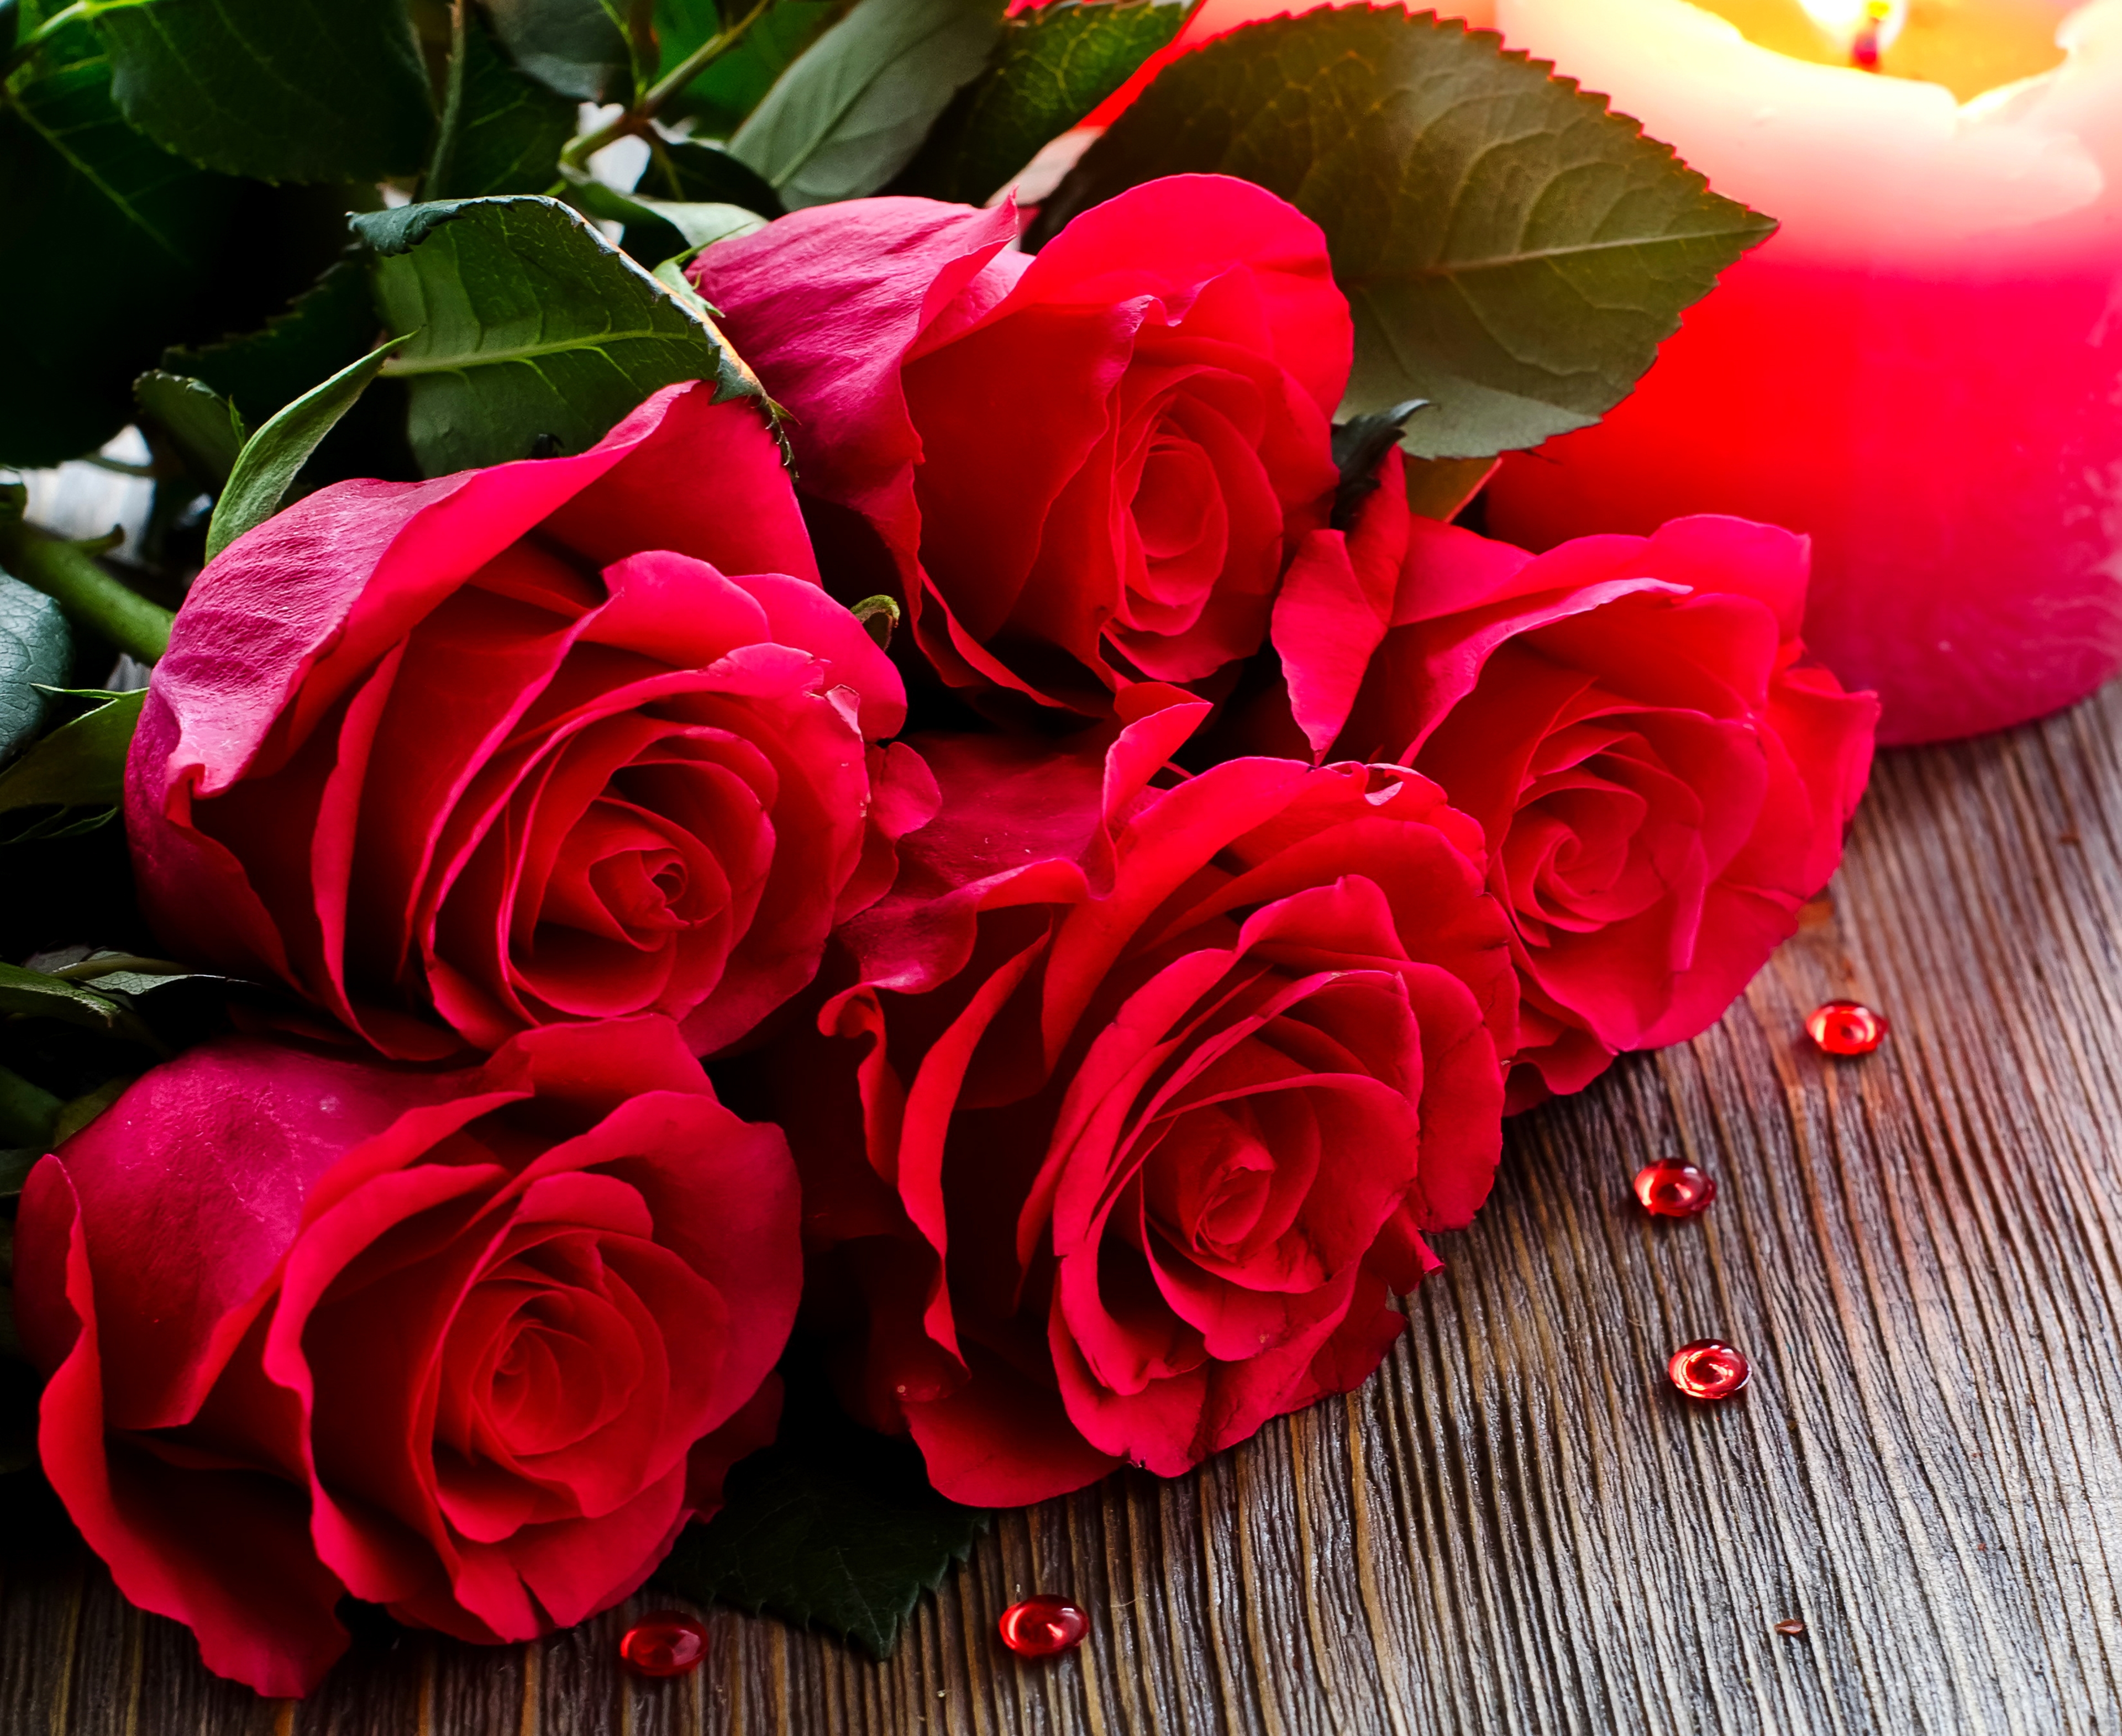 Windows Backgrounds earth, rose, bouquet, red flower, red rose, flowers